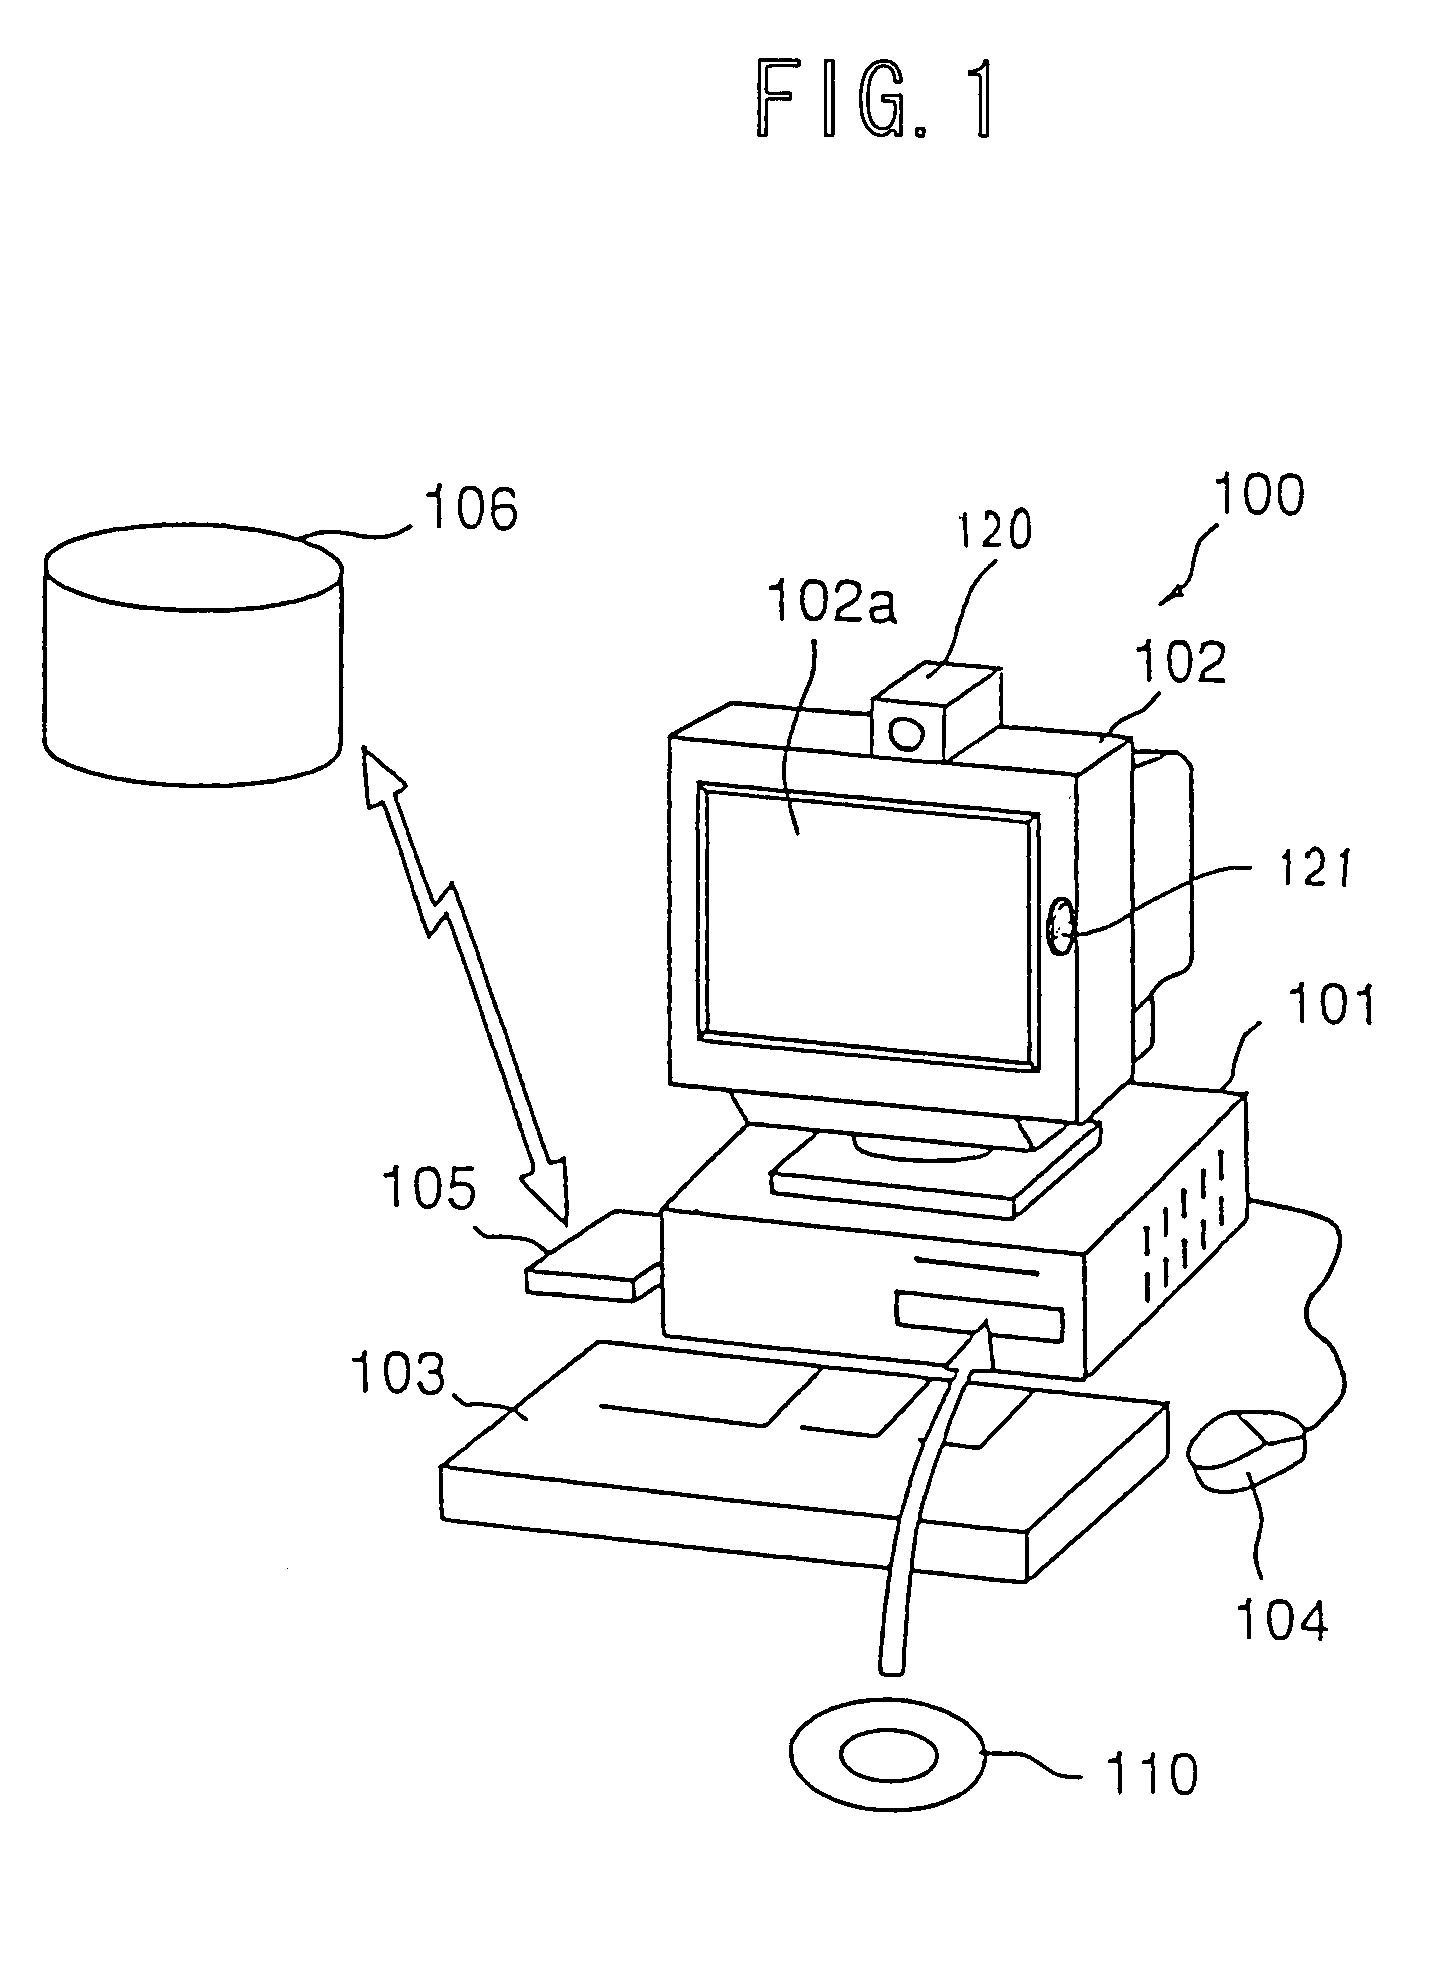 Electronic apparatus transmitting electronic mail including image information, a control apparatus, and a storage medium